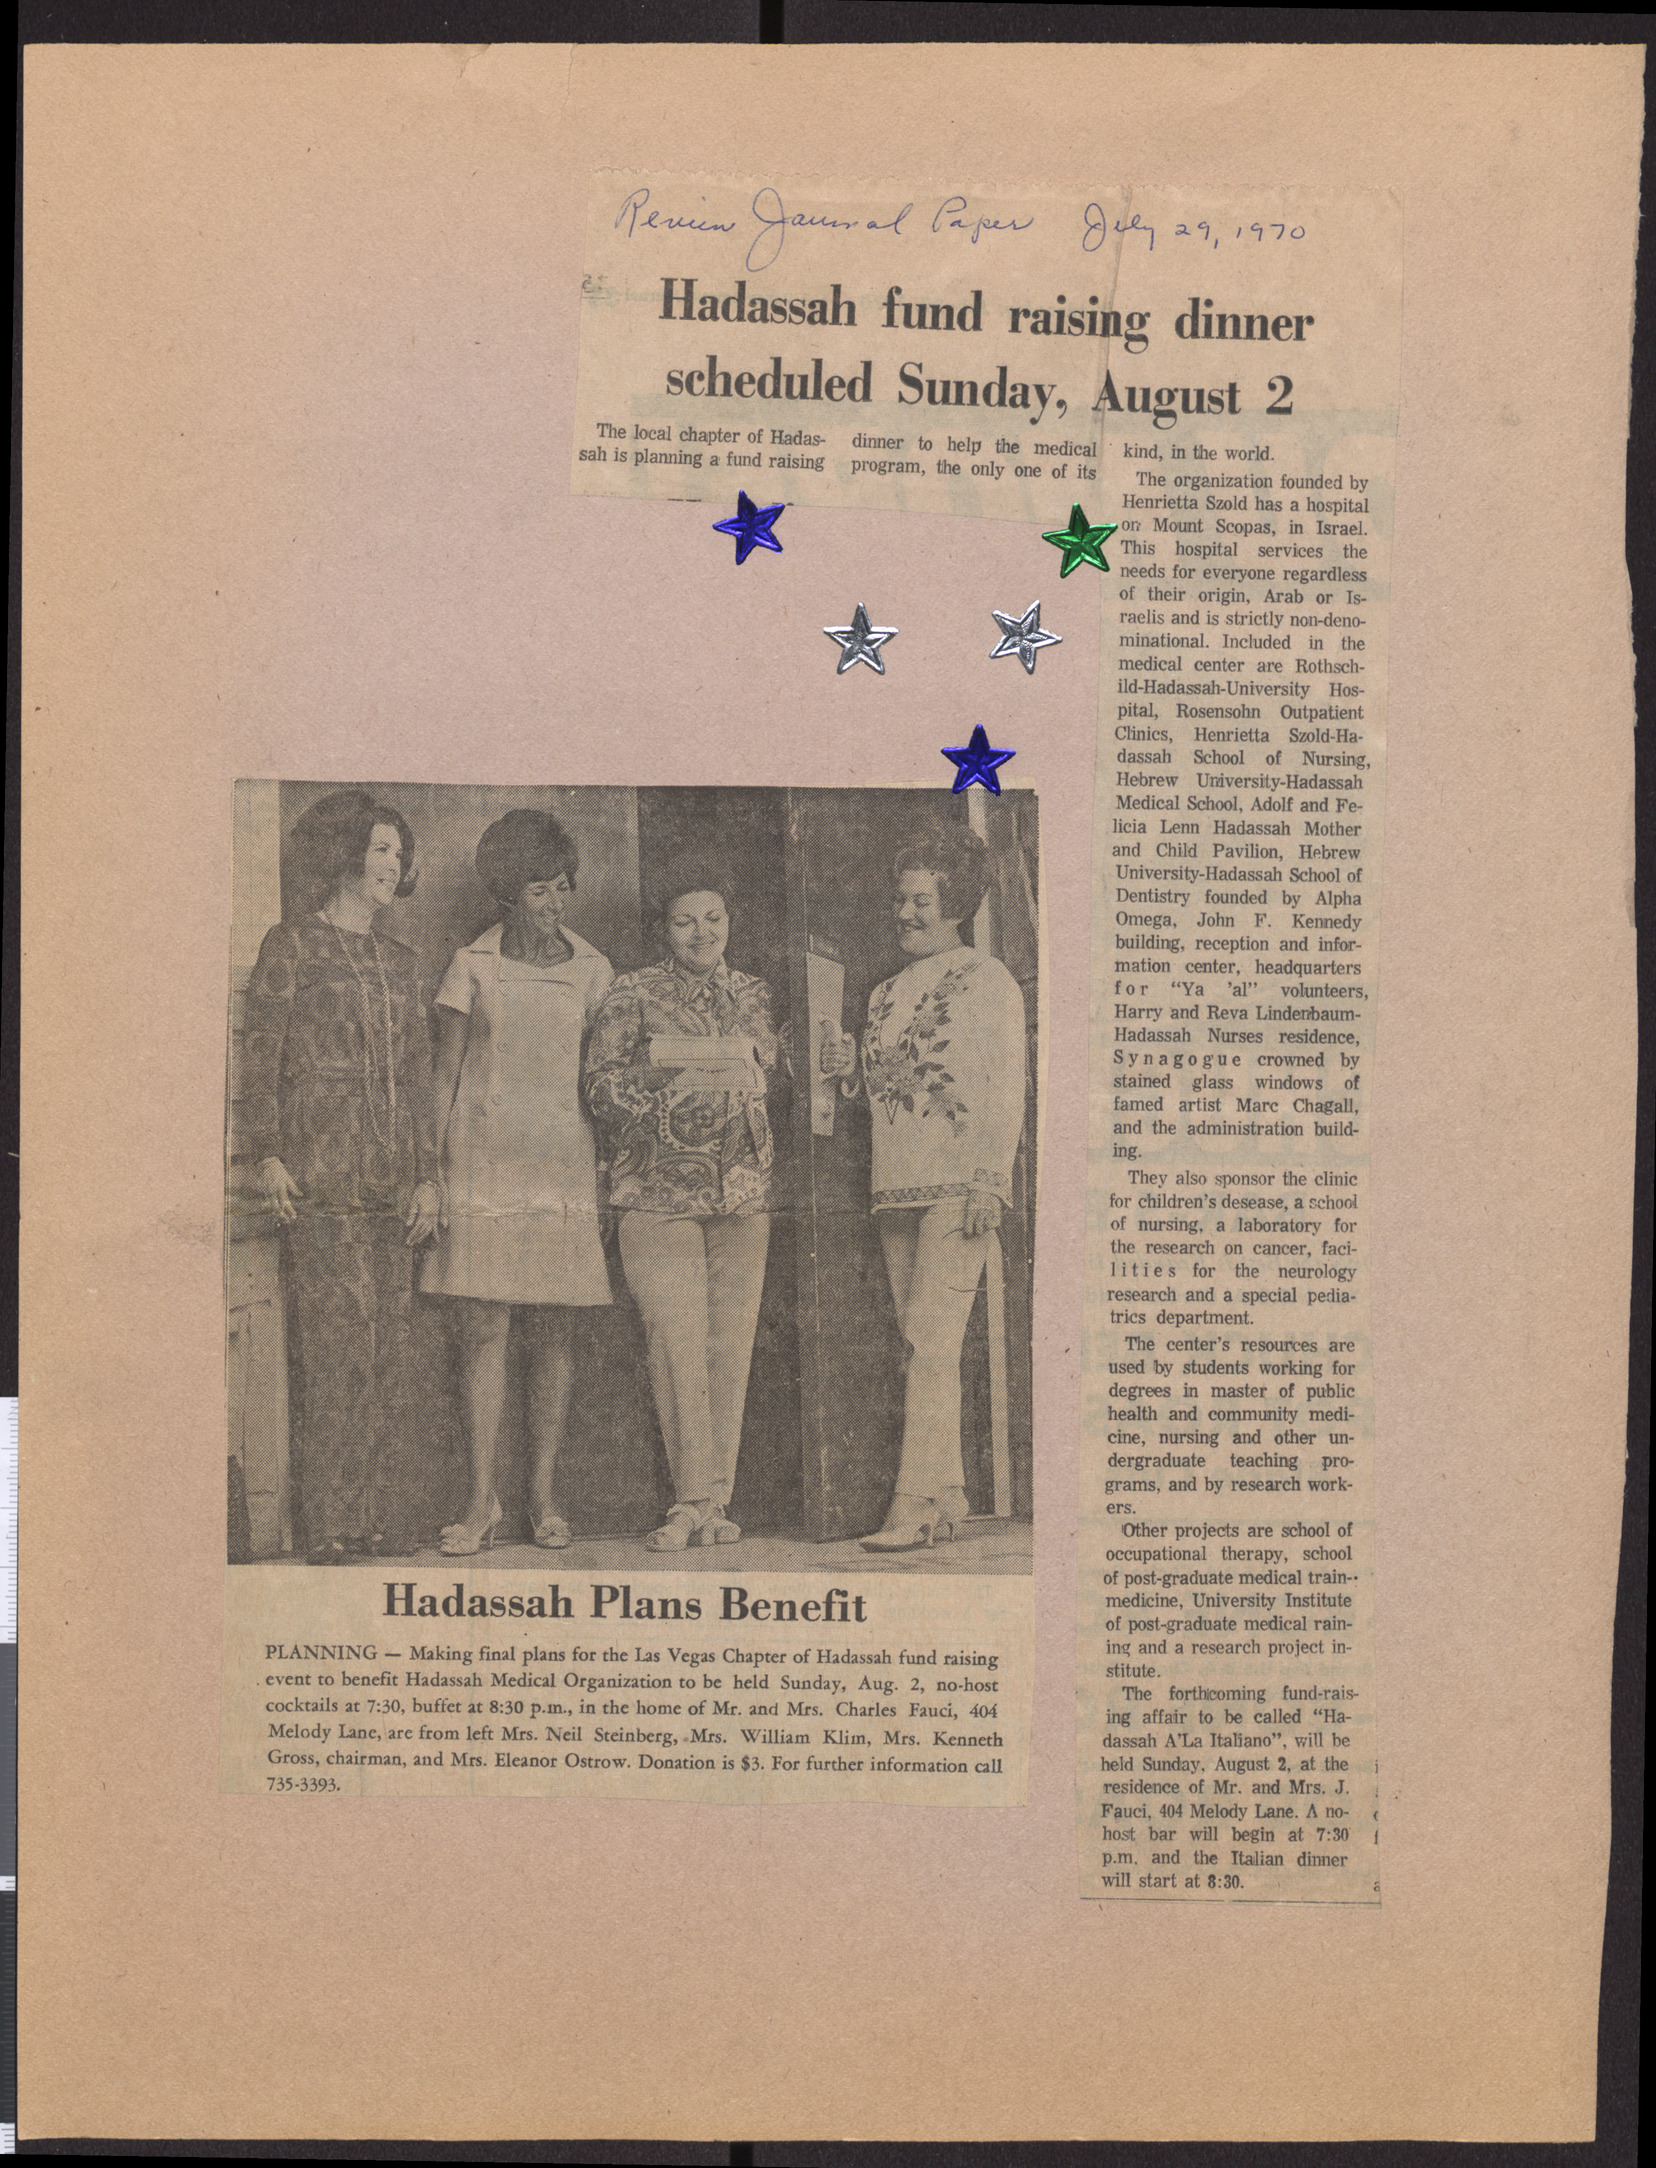 Newspaper clipping about Hadassah benefit event, August 1970